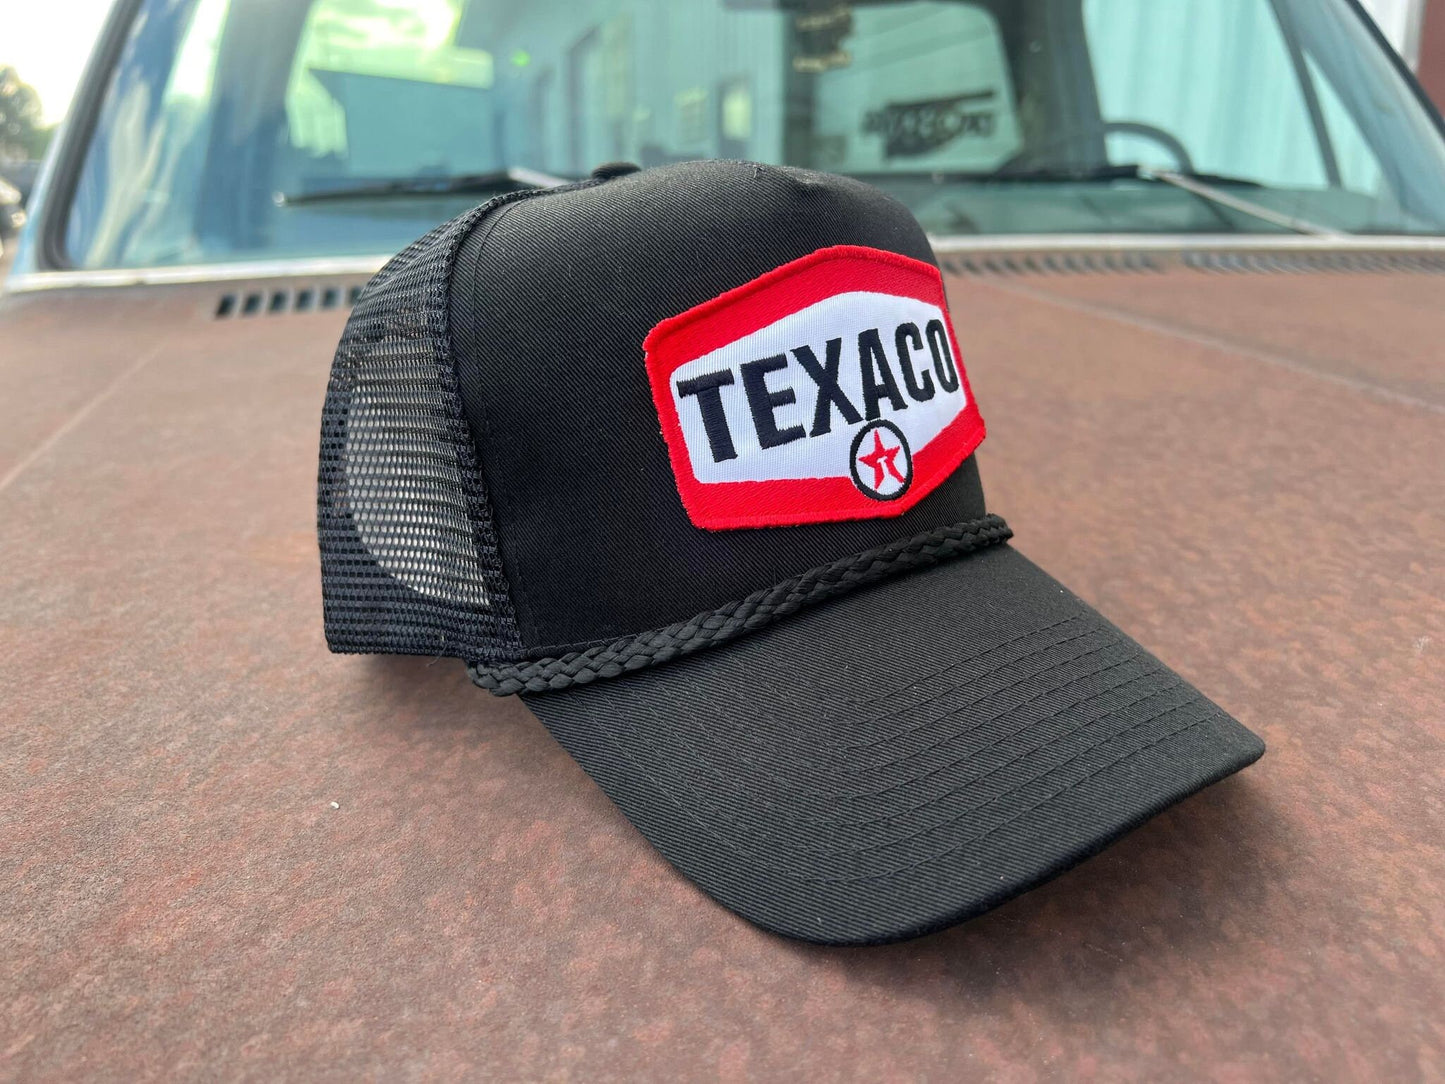 Vintage TEXACO Patch Rope Style Snap Back Trucker Hat - Retro Americana Advertising Cap - Mesh Material - One Size Fits All - 3 Colors